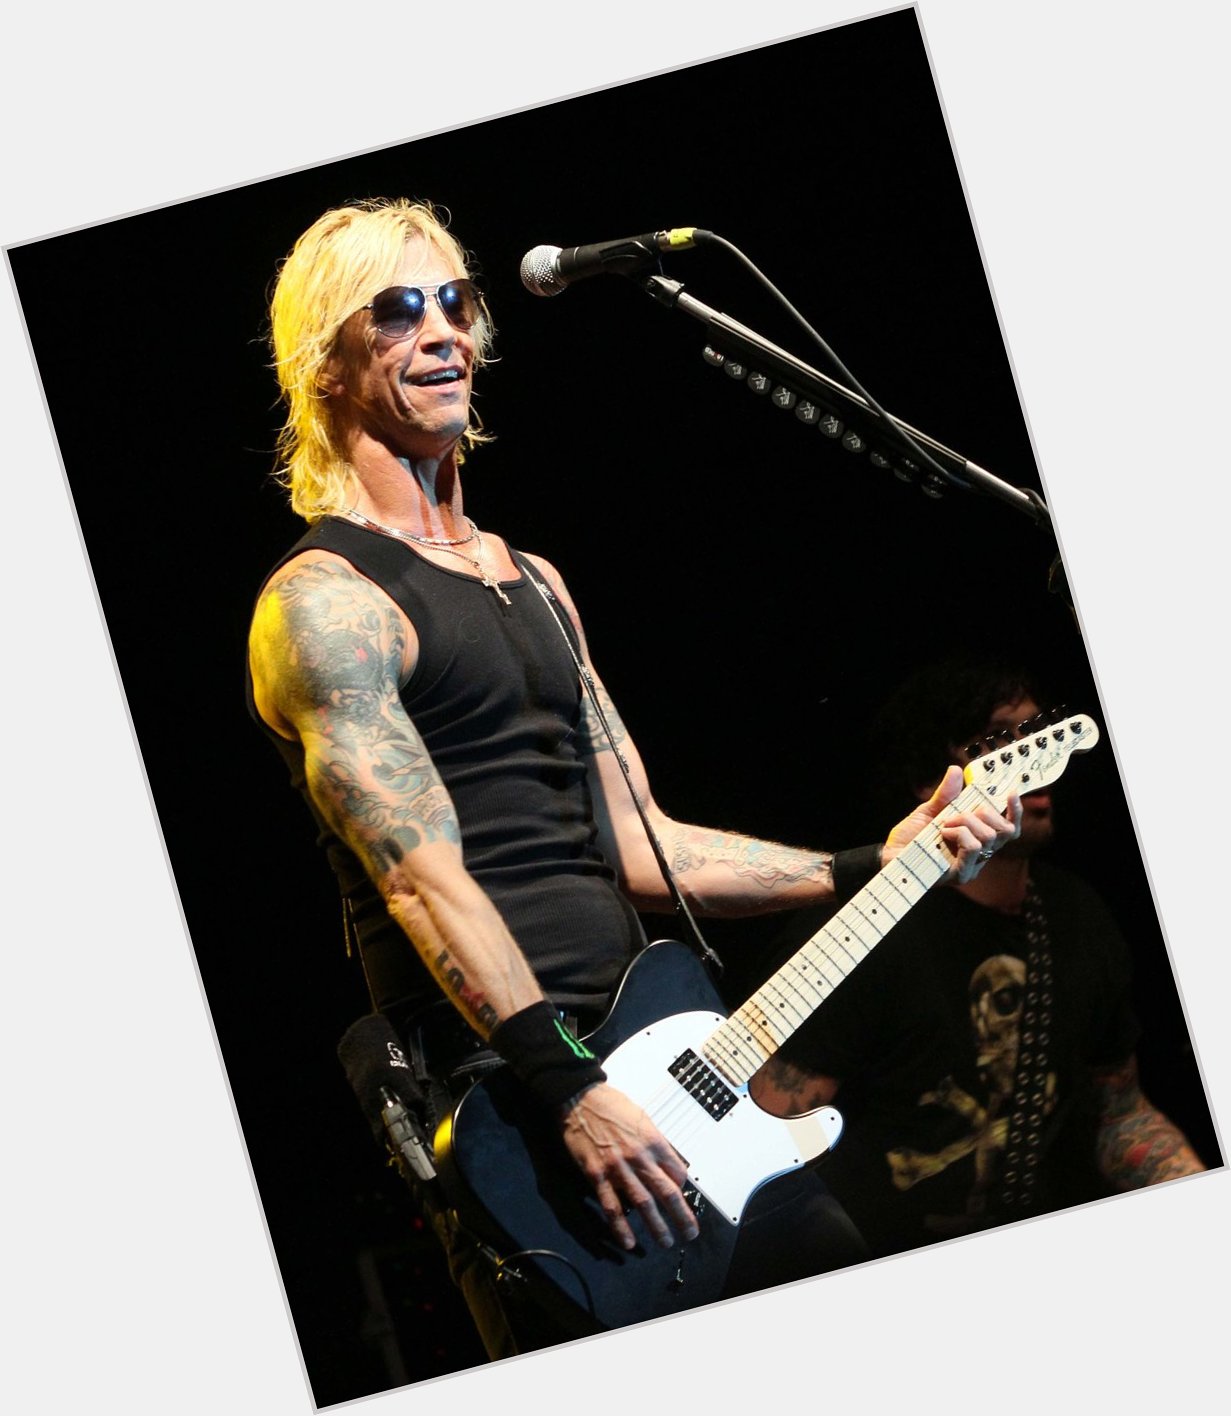 Happy birthday to DUFF McKAGAN! The Rock & Roll Hall of Fame bassist is 59 today

?Reuters 